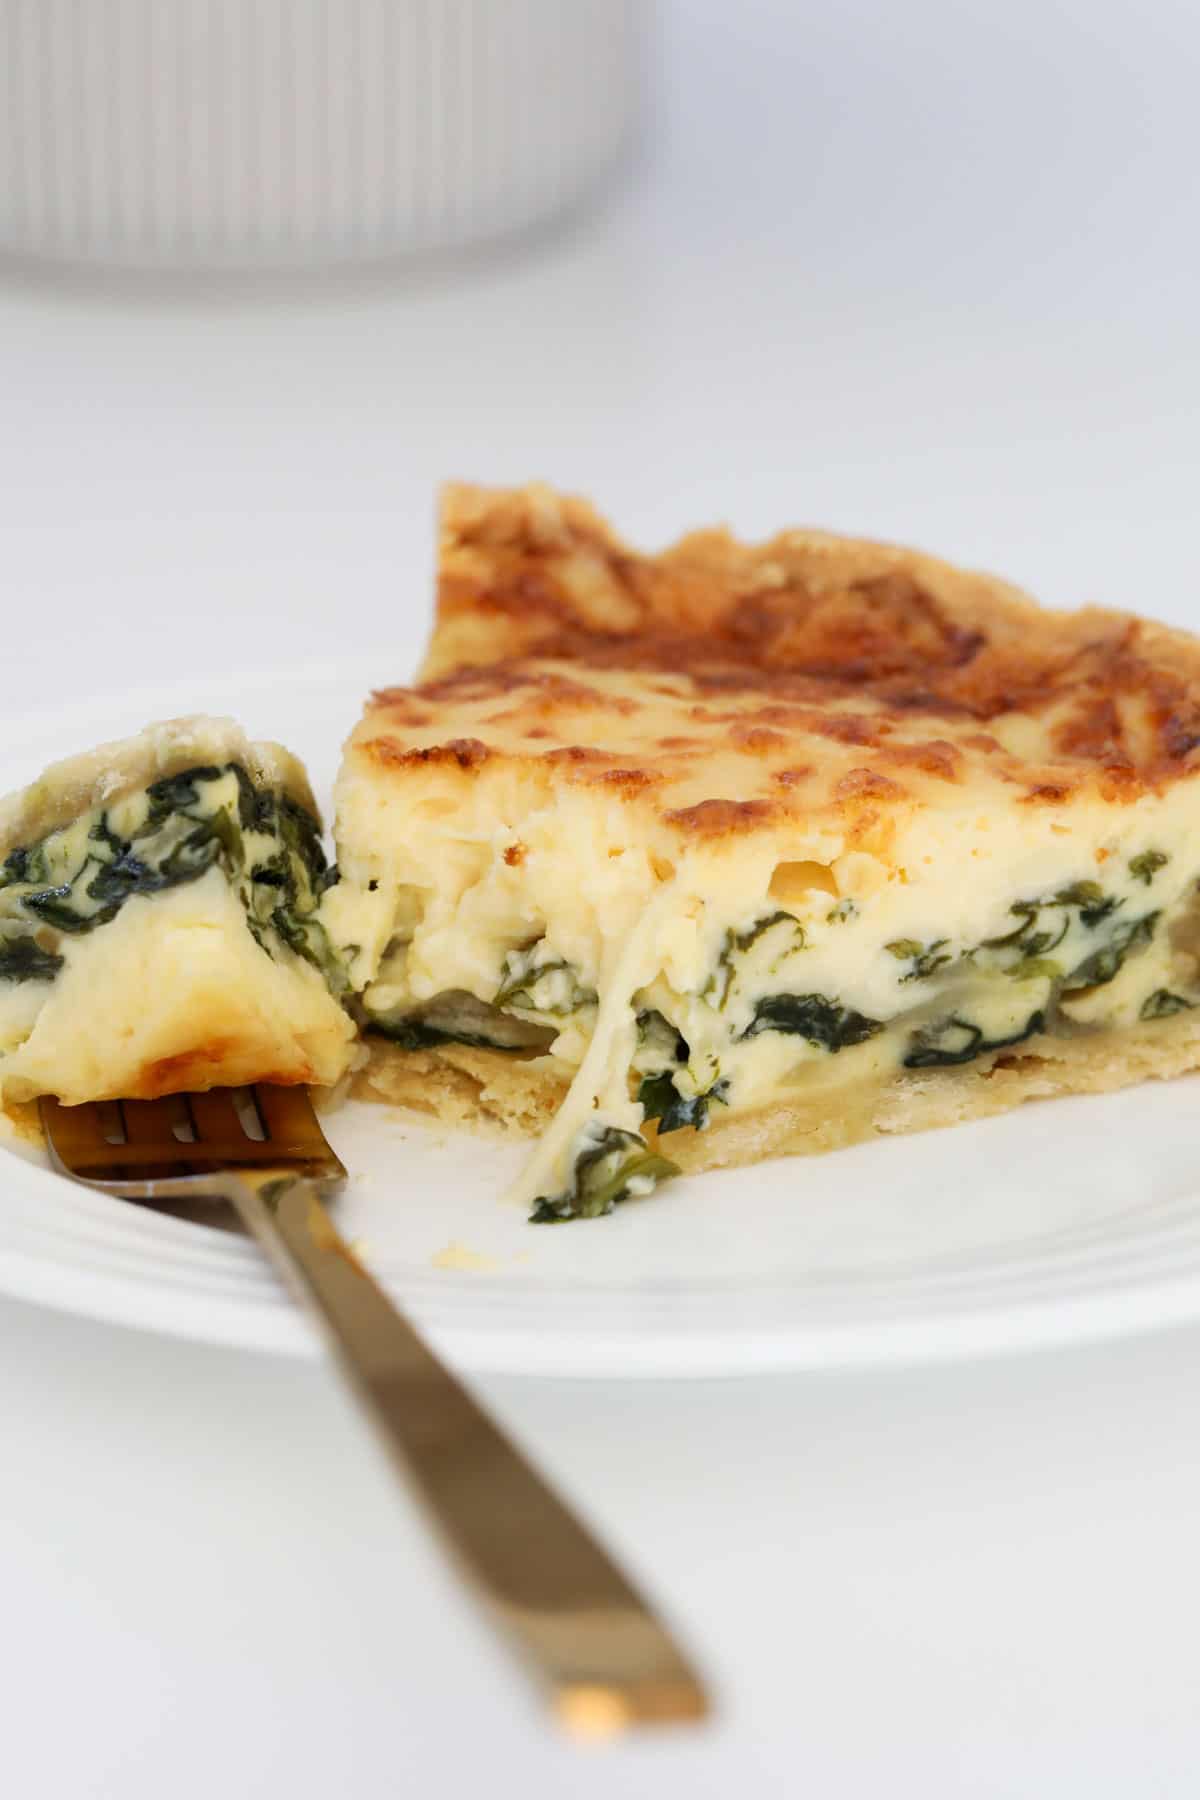 Spinach quiche on a plate with a gold fork resting on it.